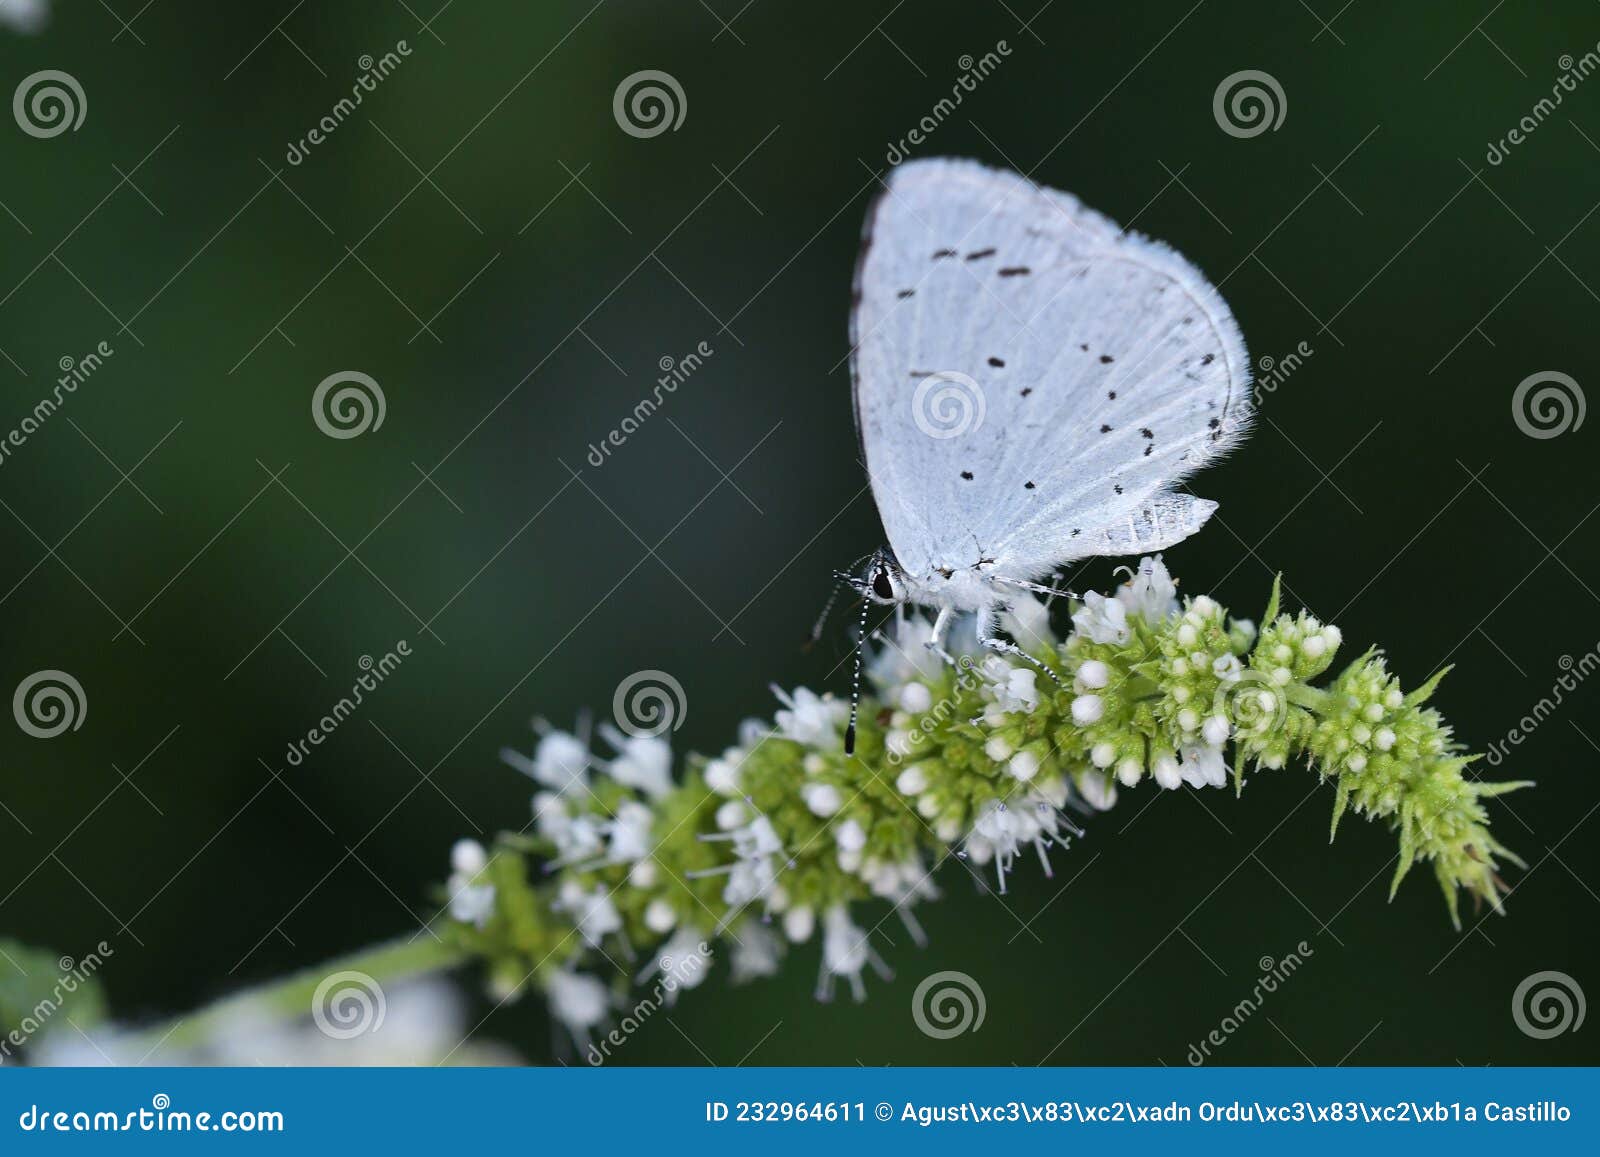 day butterfly perched on flower, celastrina argiolus.